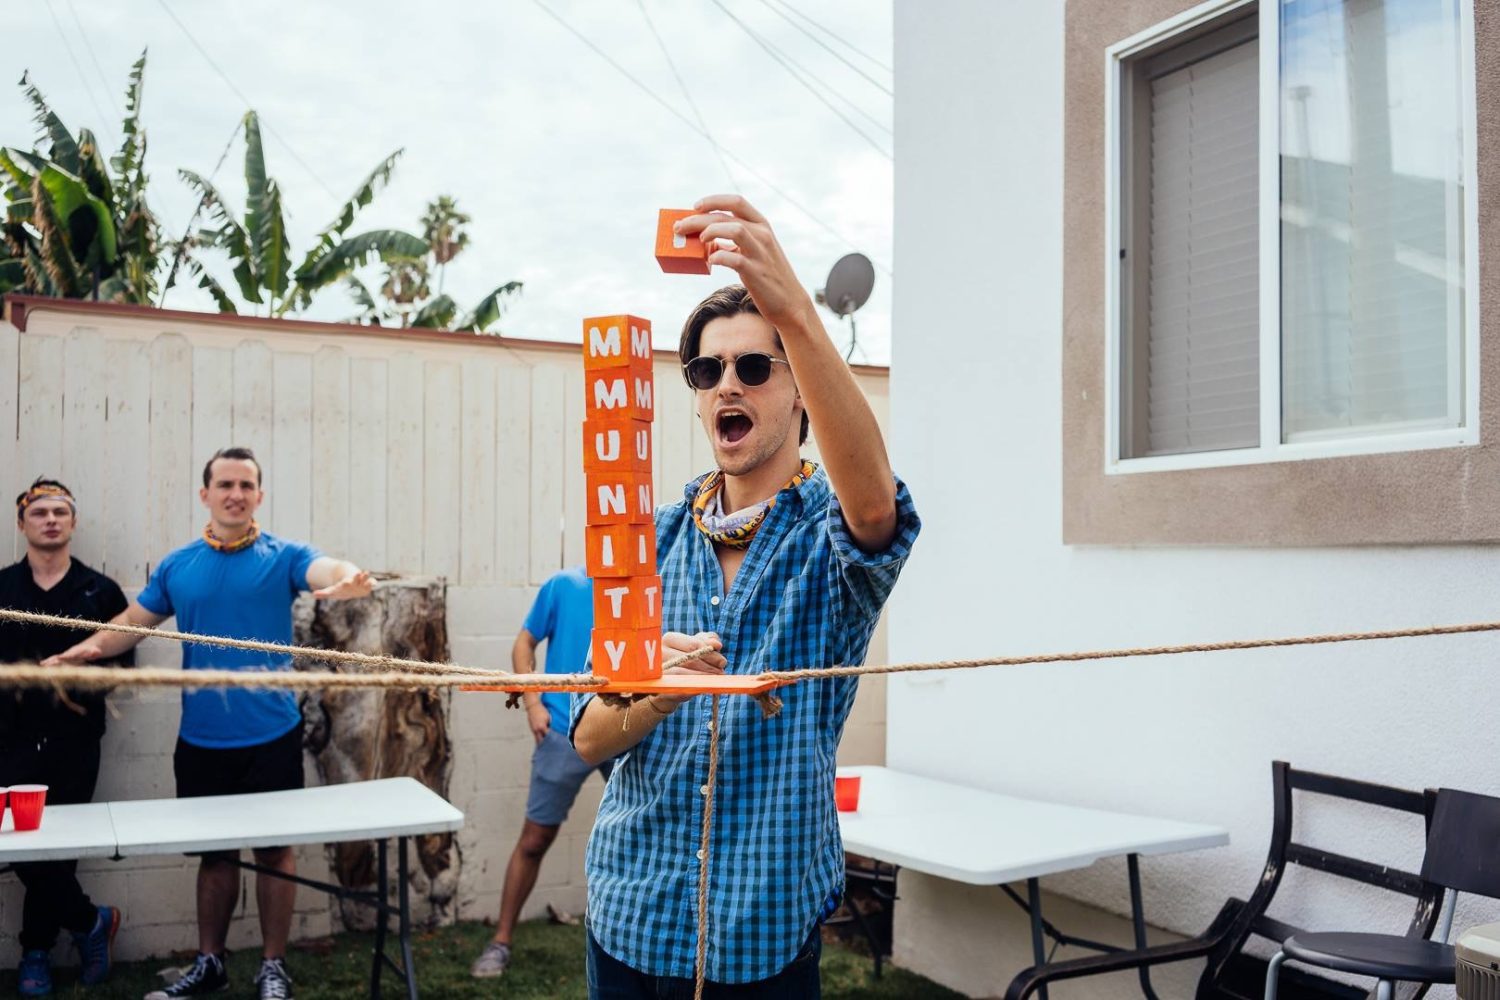 A guy balancing blocks on a wooden strip in the air.